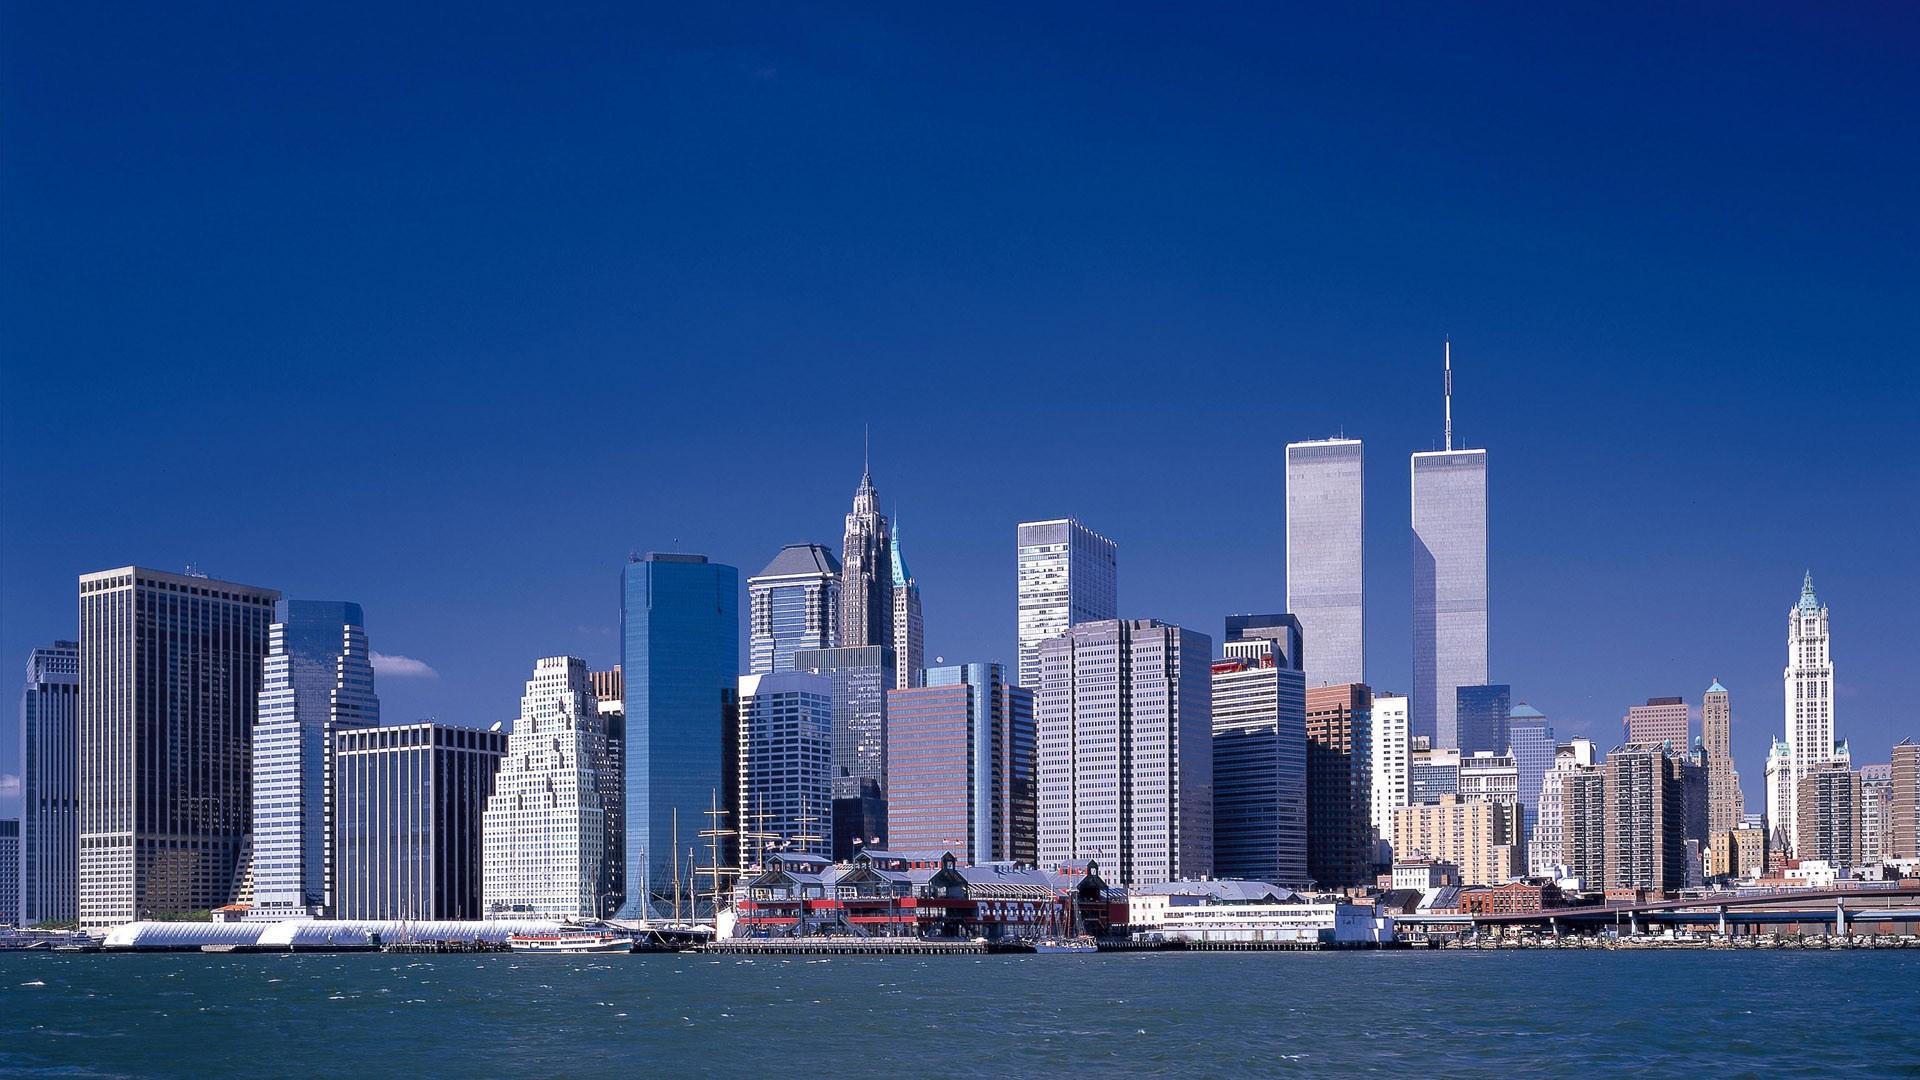 Wallpaper of the twin towers in New York Picture 1920x1080 1080p